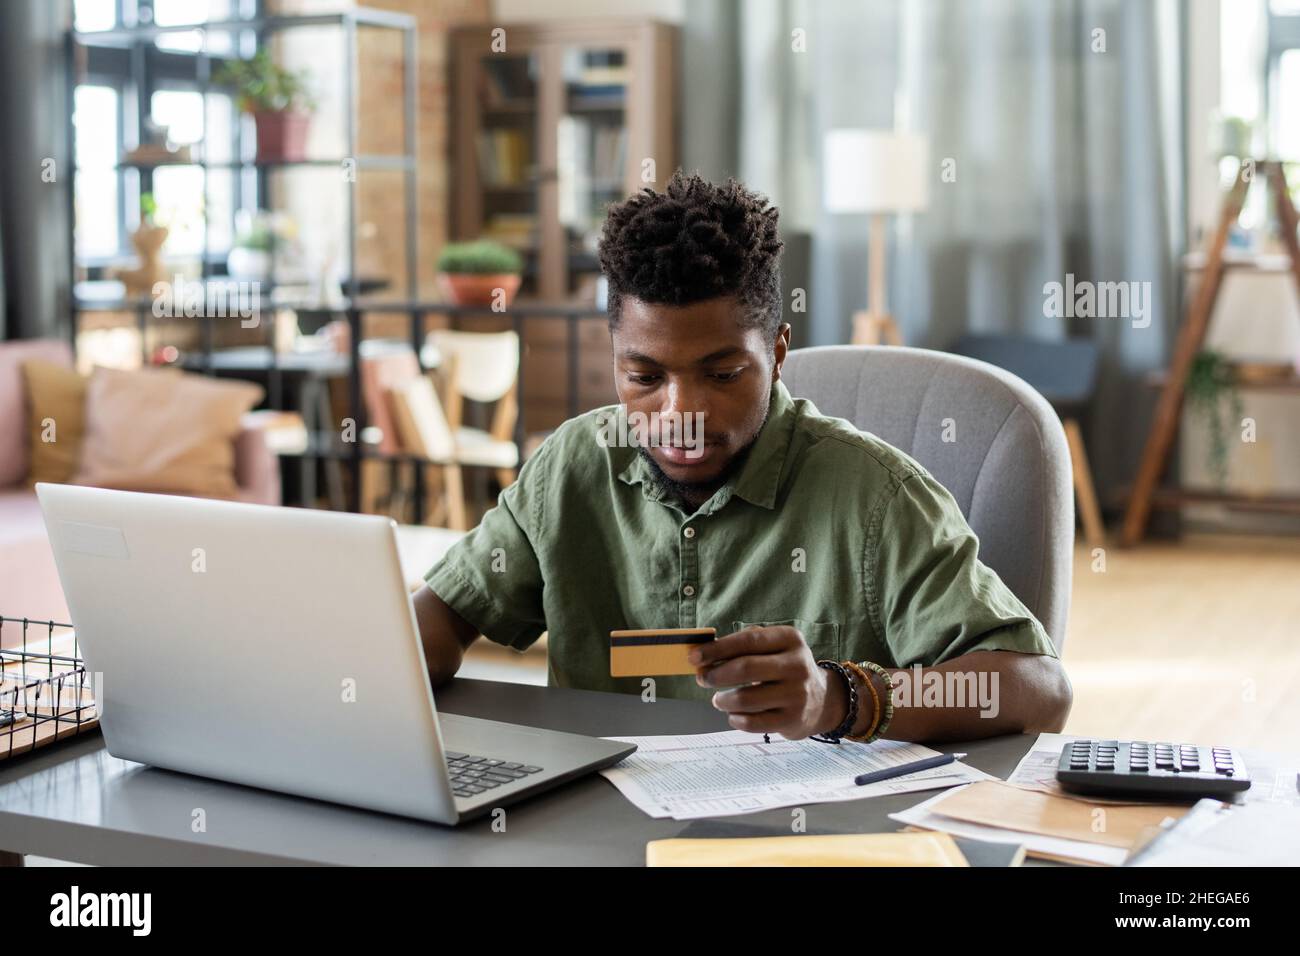 Young African man looking at credit card in his hand while sitting by table in front of laptop and going to pay for online purchase Stock Photo